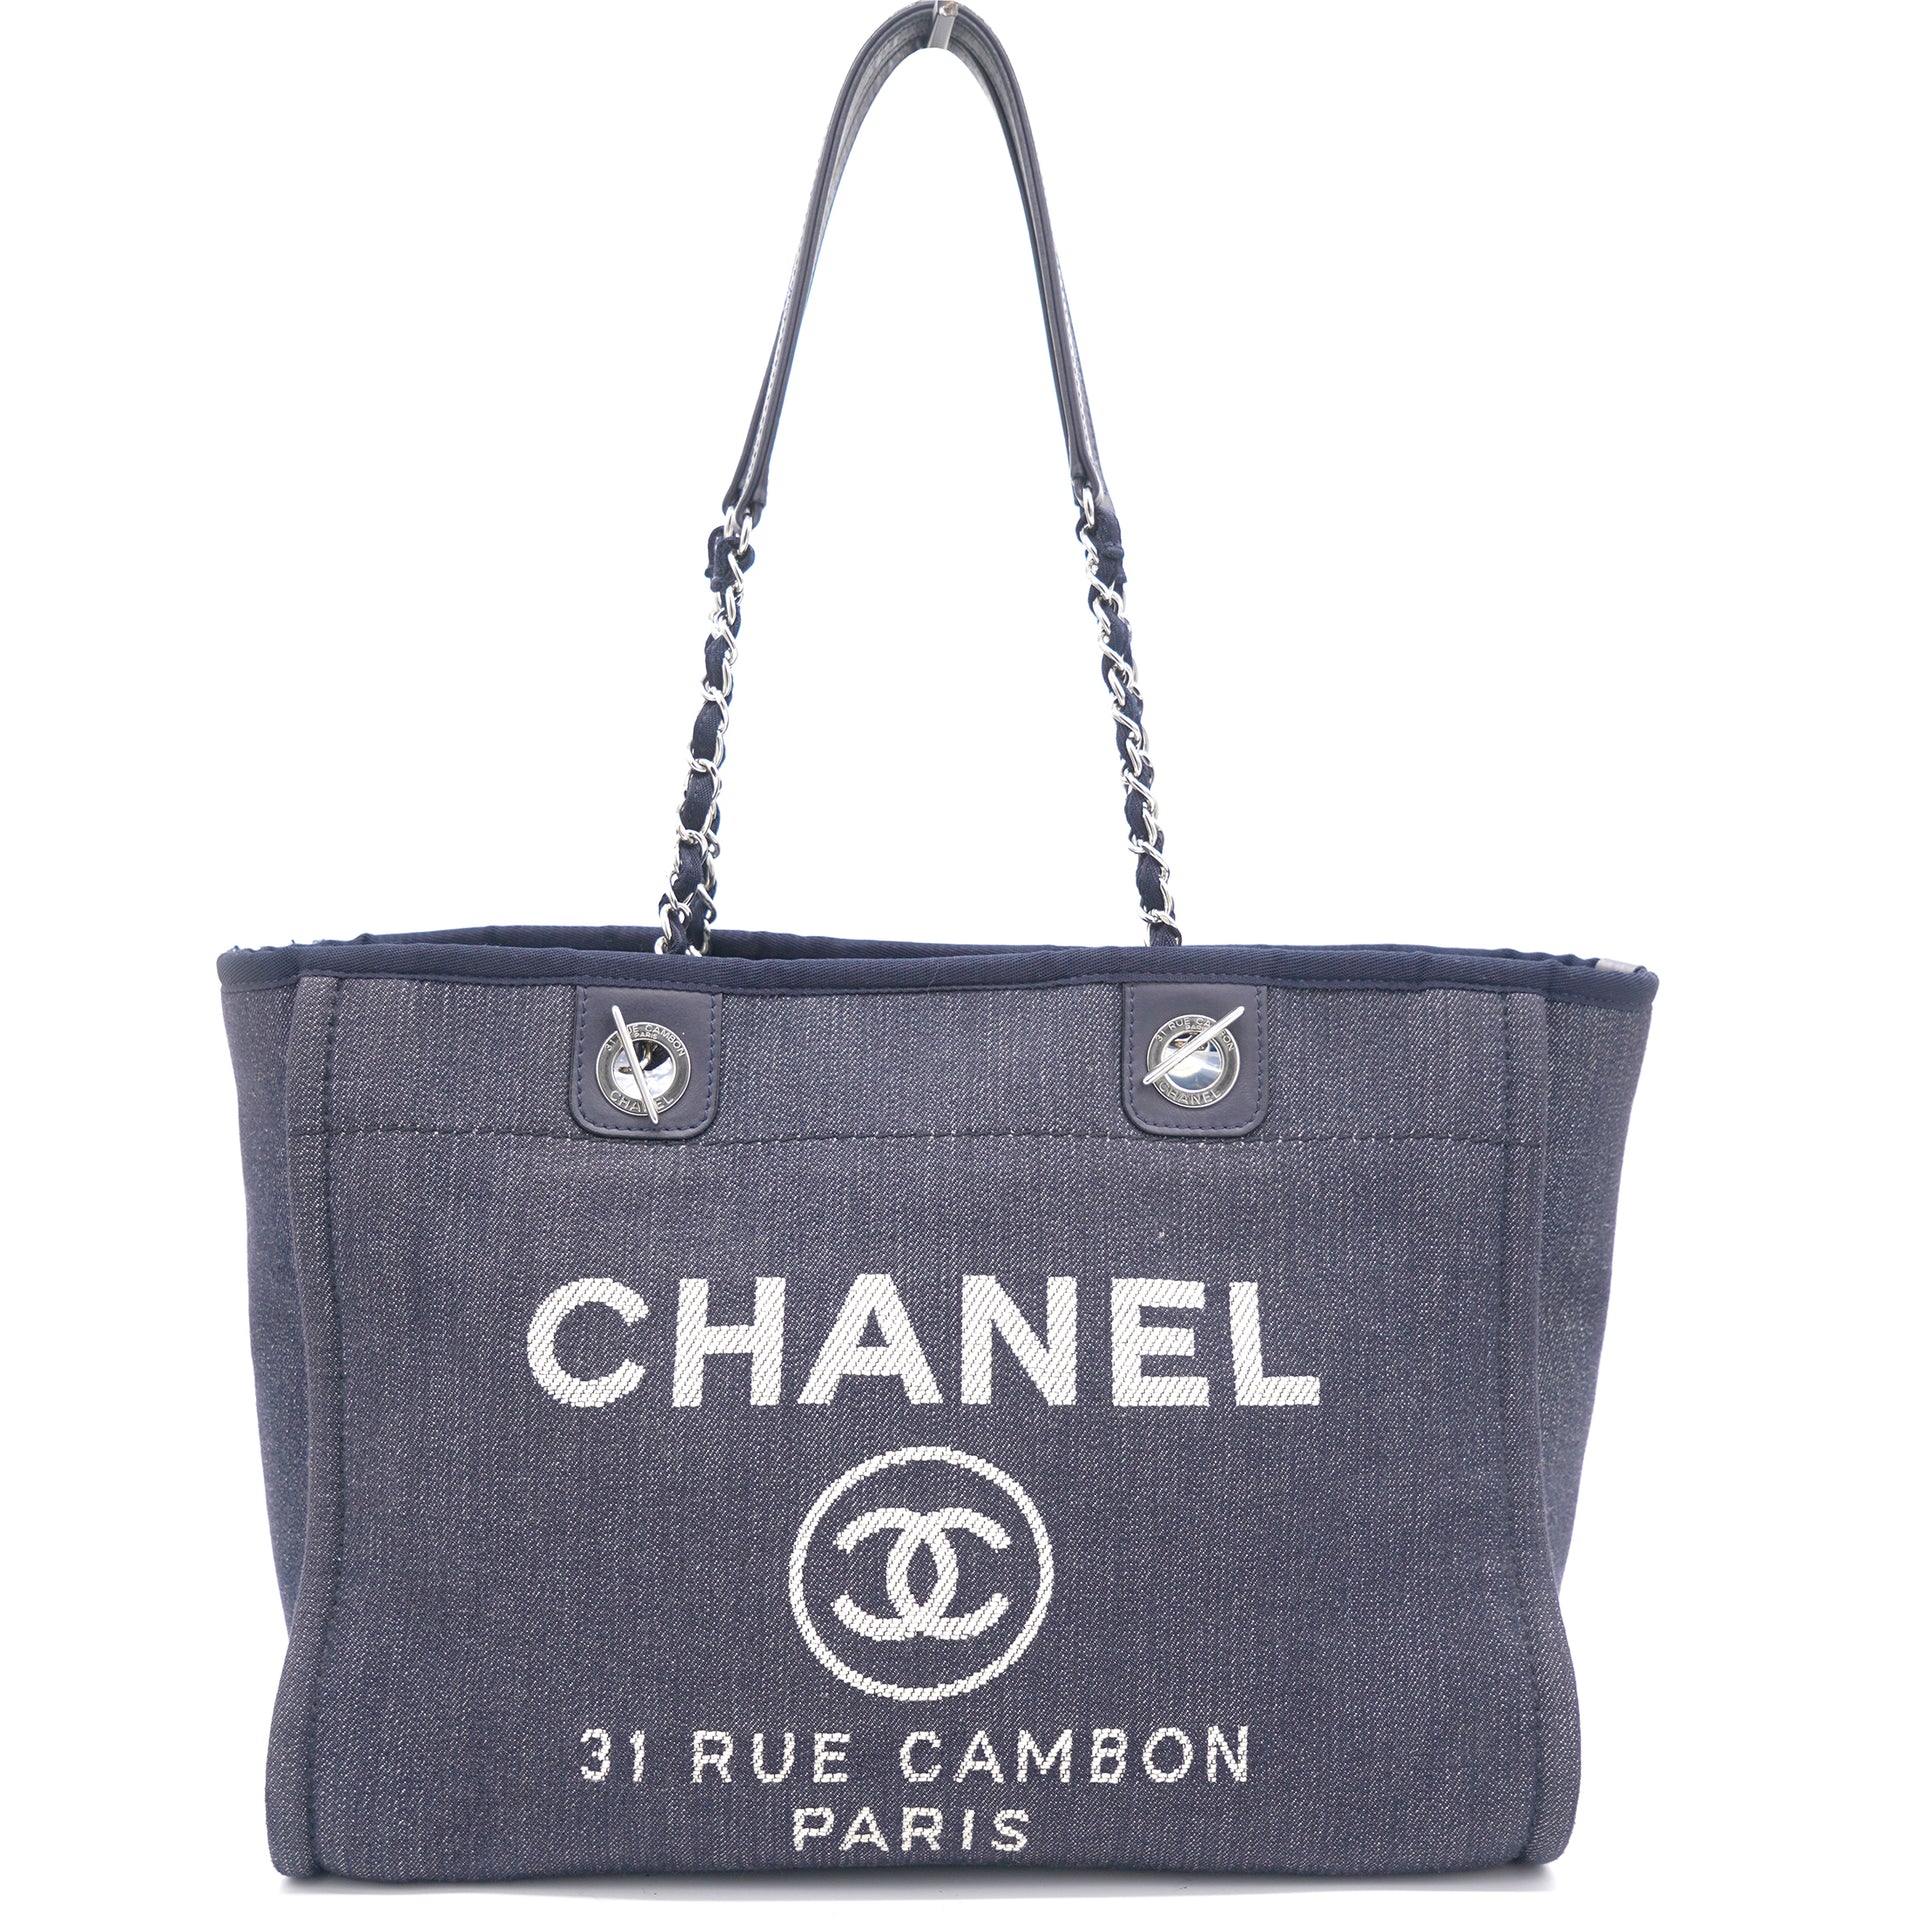 Chanel Deauville Large Shopping Tote Bag A66941 Denim Blue Purse